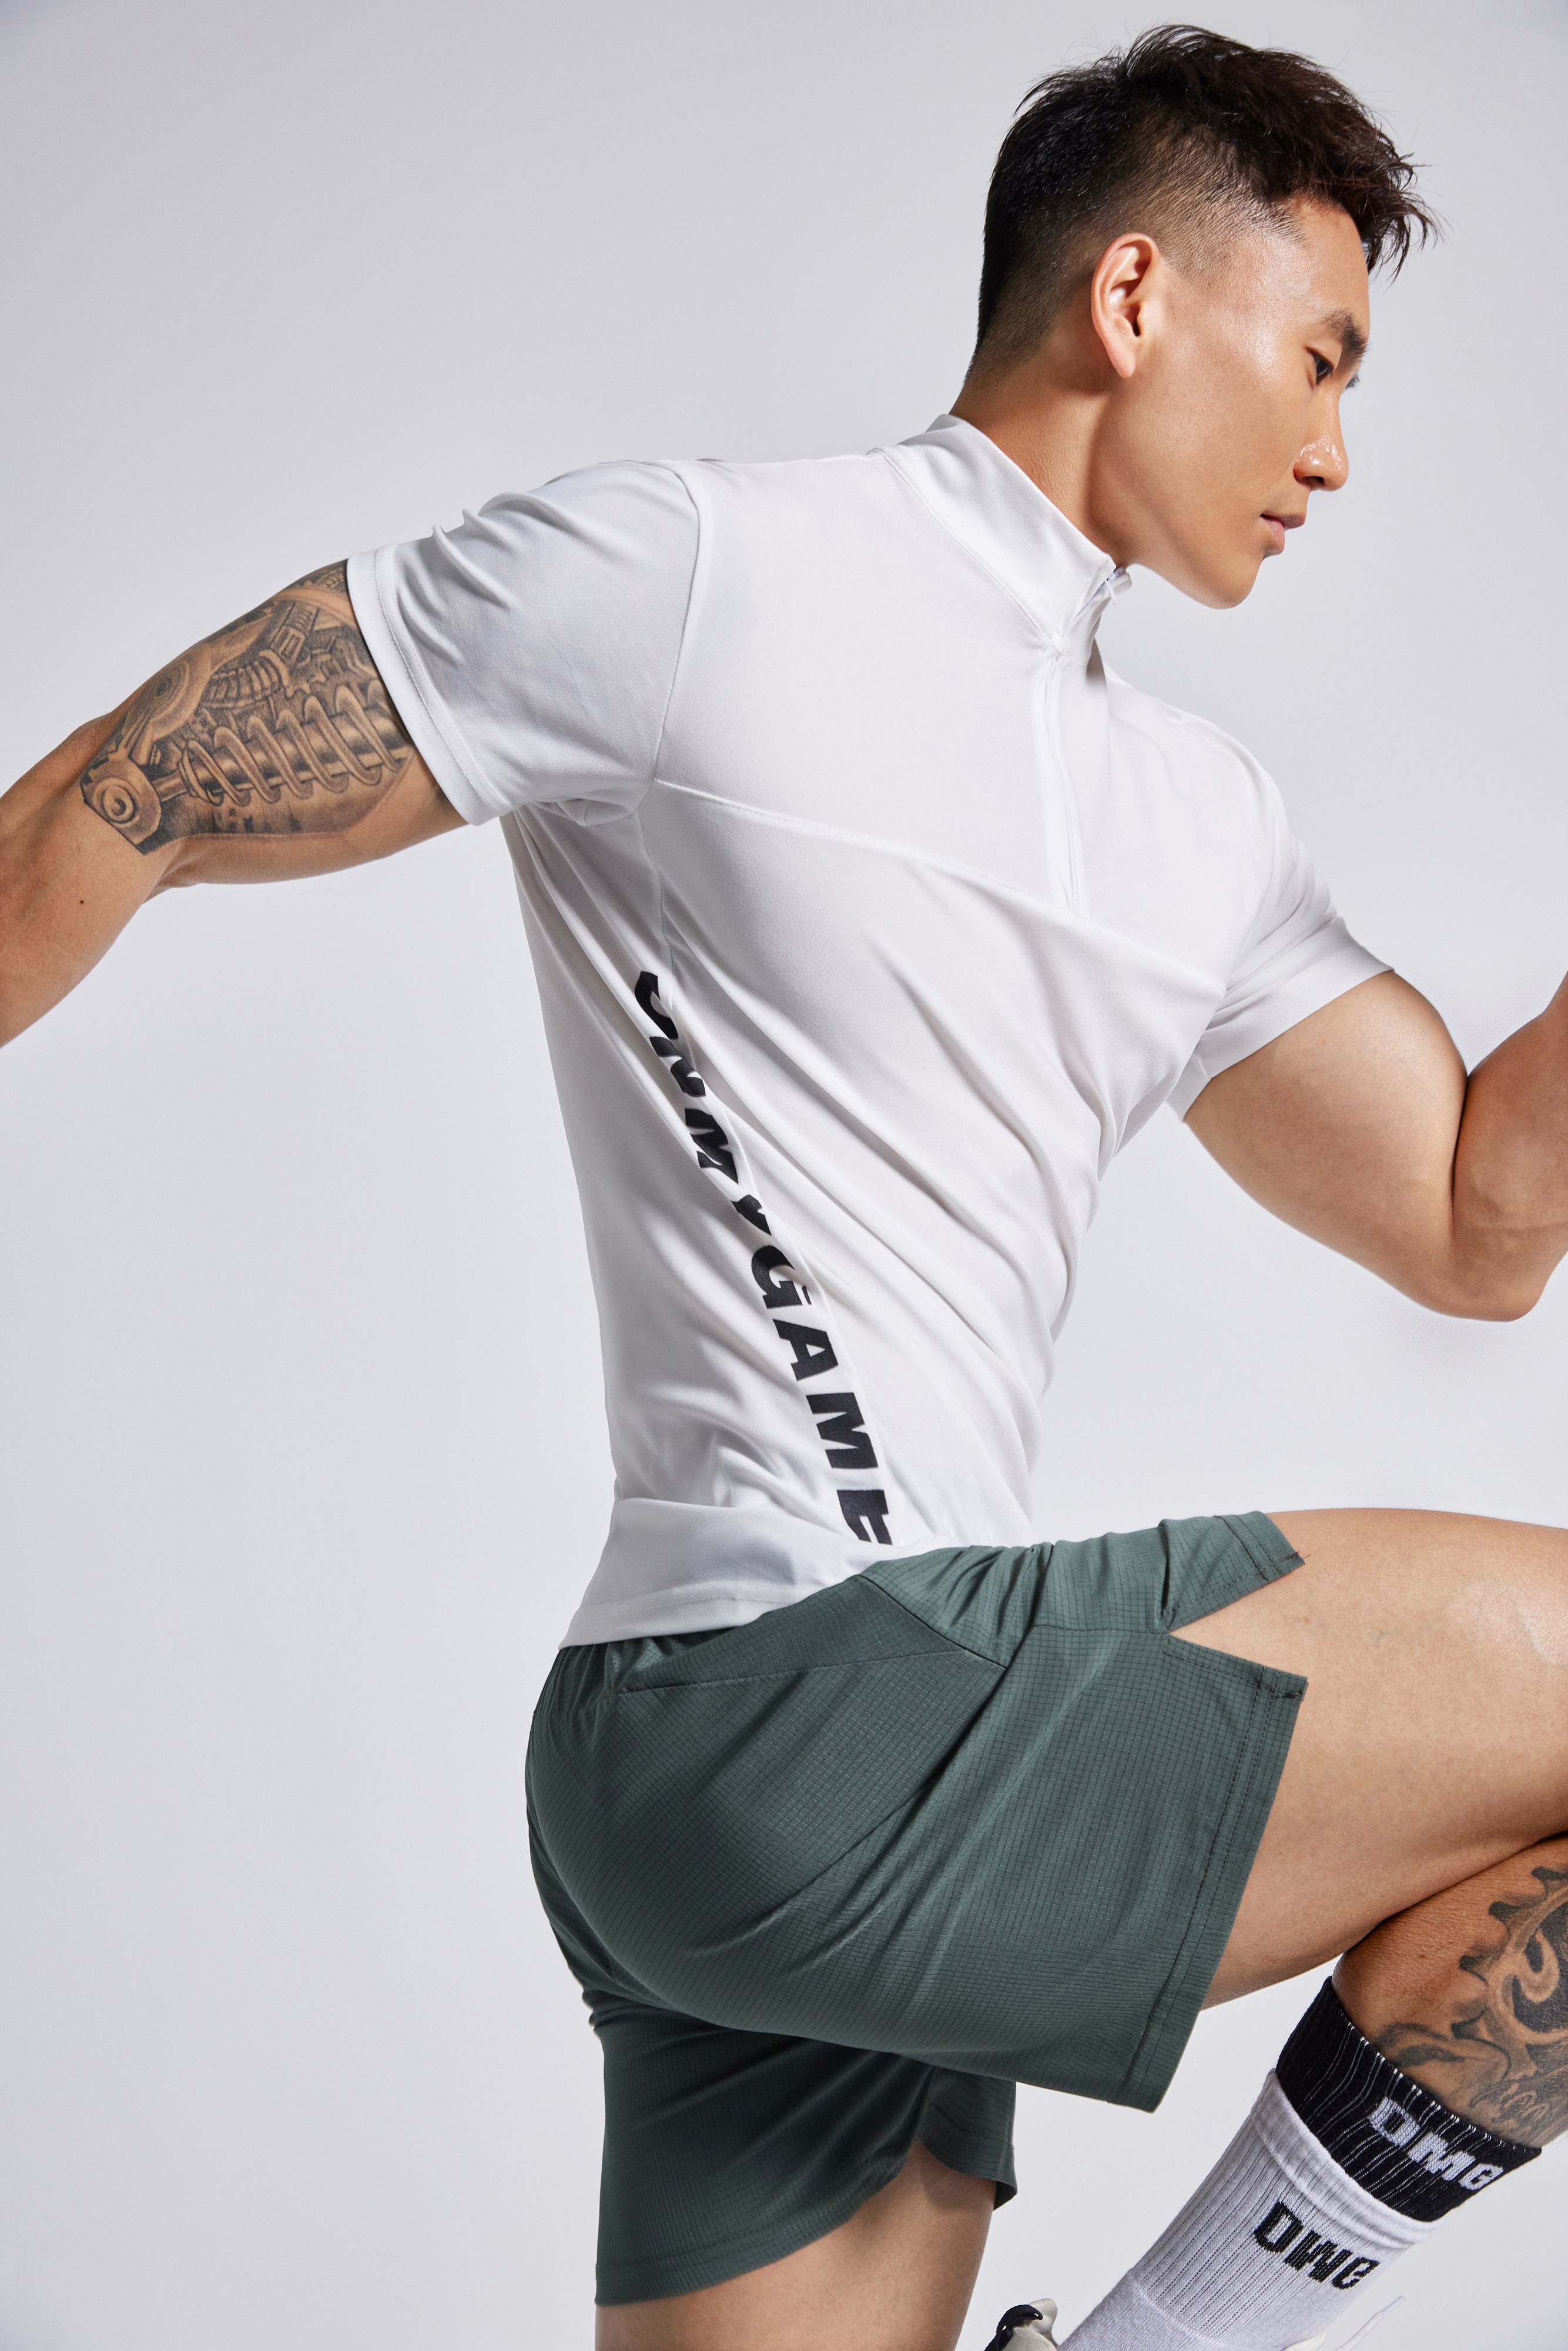 Men Sports Shirt, Quick Through Breathable Fitness Step Coach Clothes, Men  And Women In Europe And America Fitness T Shirt Short Sleeve, From Uzec2,  $77.39